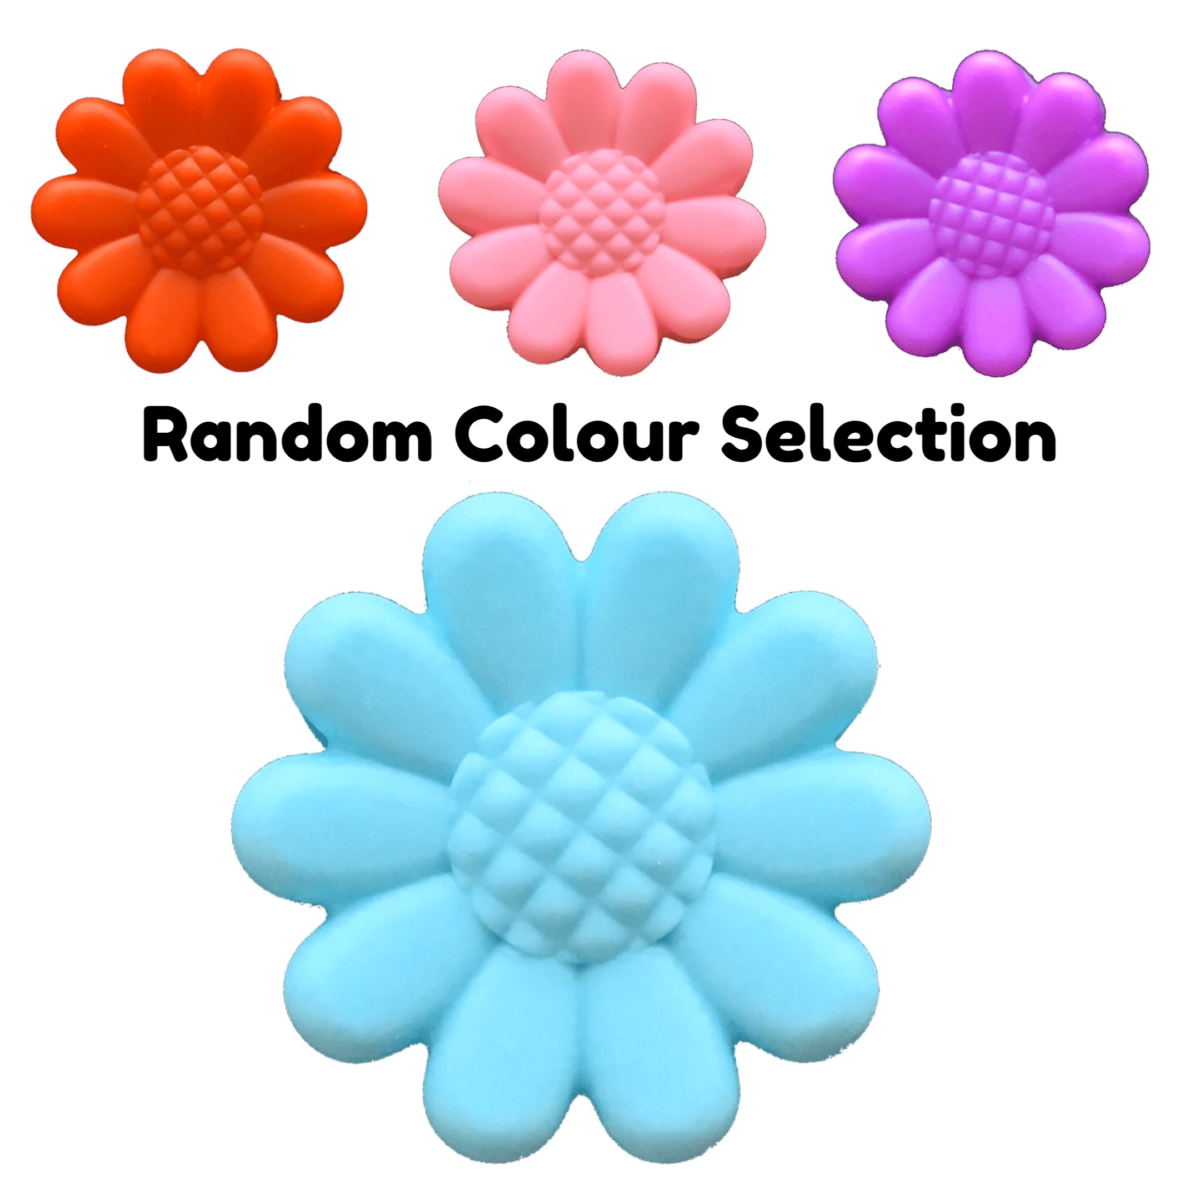 5cm daisy flower single cavity silicone moulds displayed in red, pink, purple and blue with the text 'random colour selection'